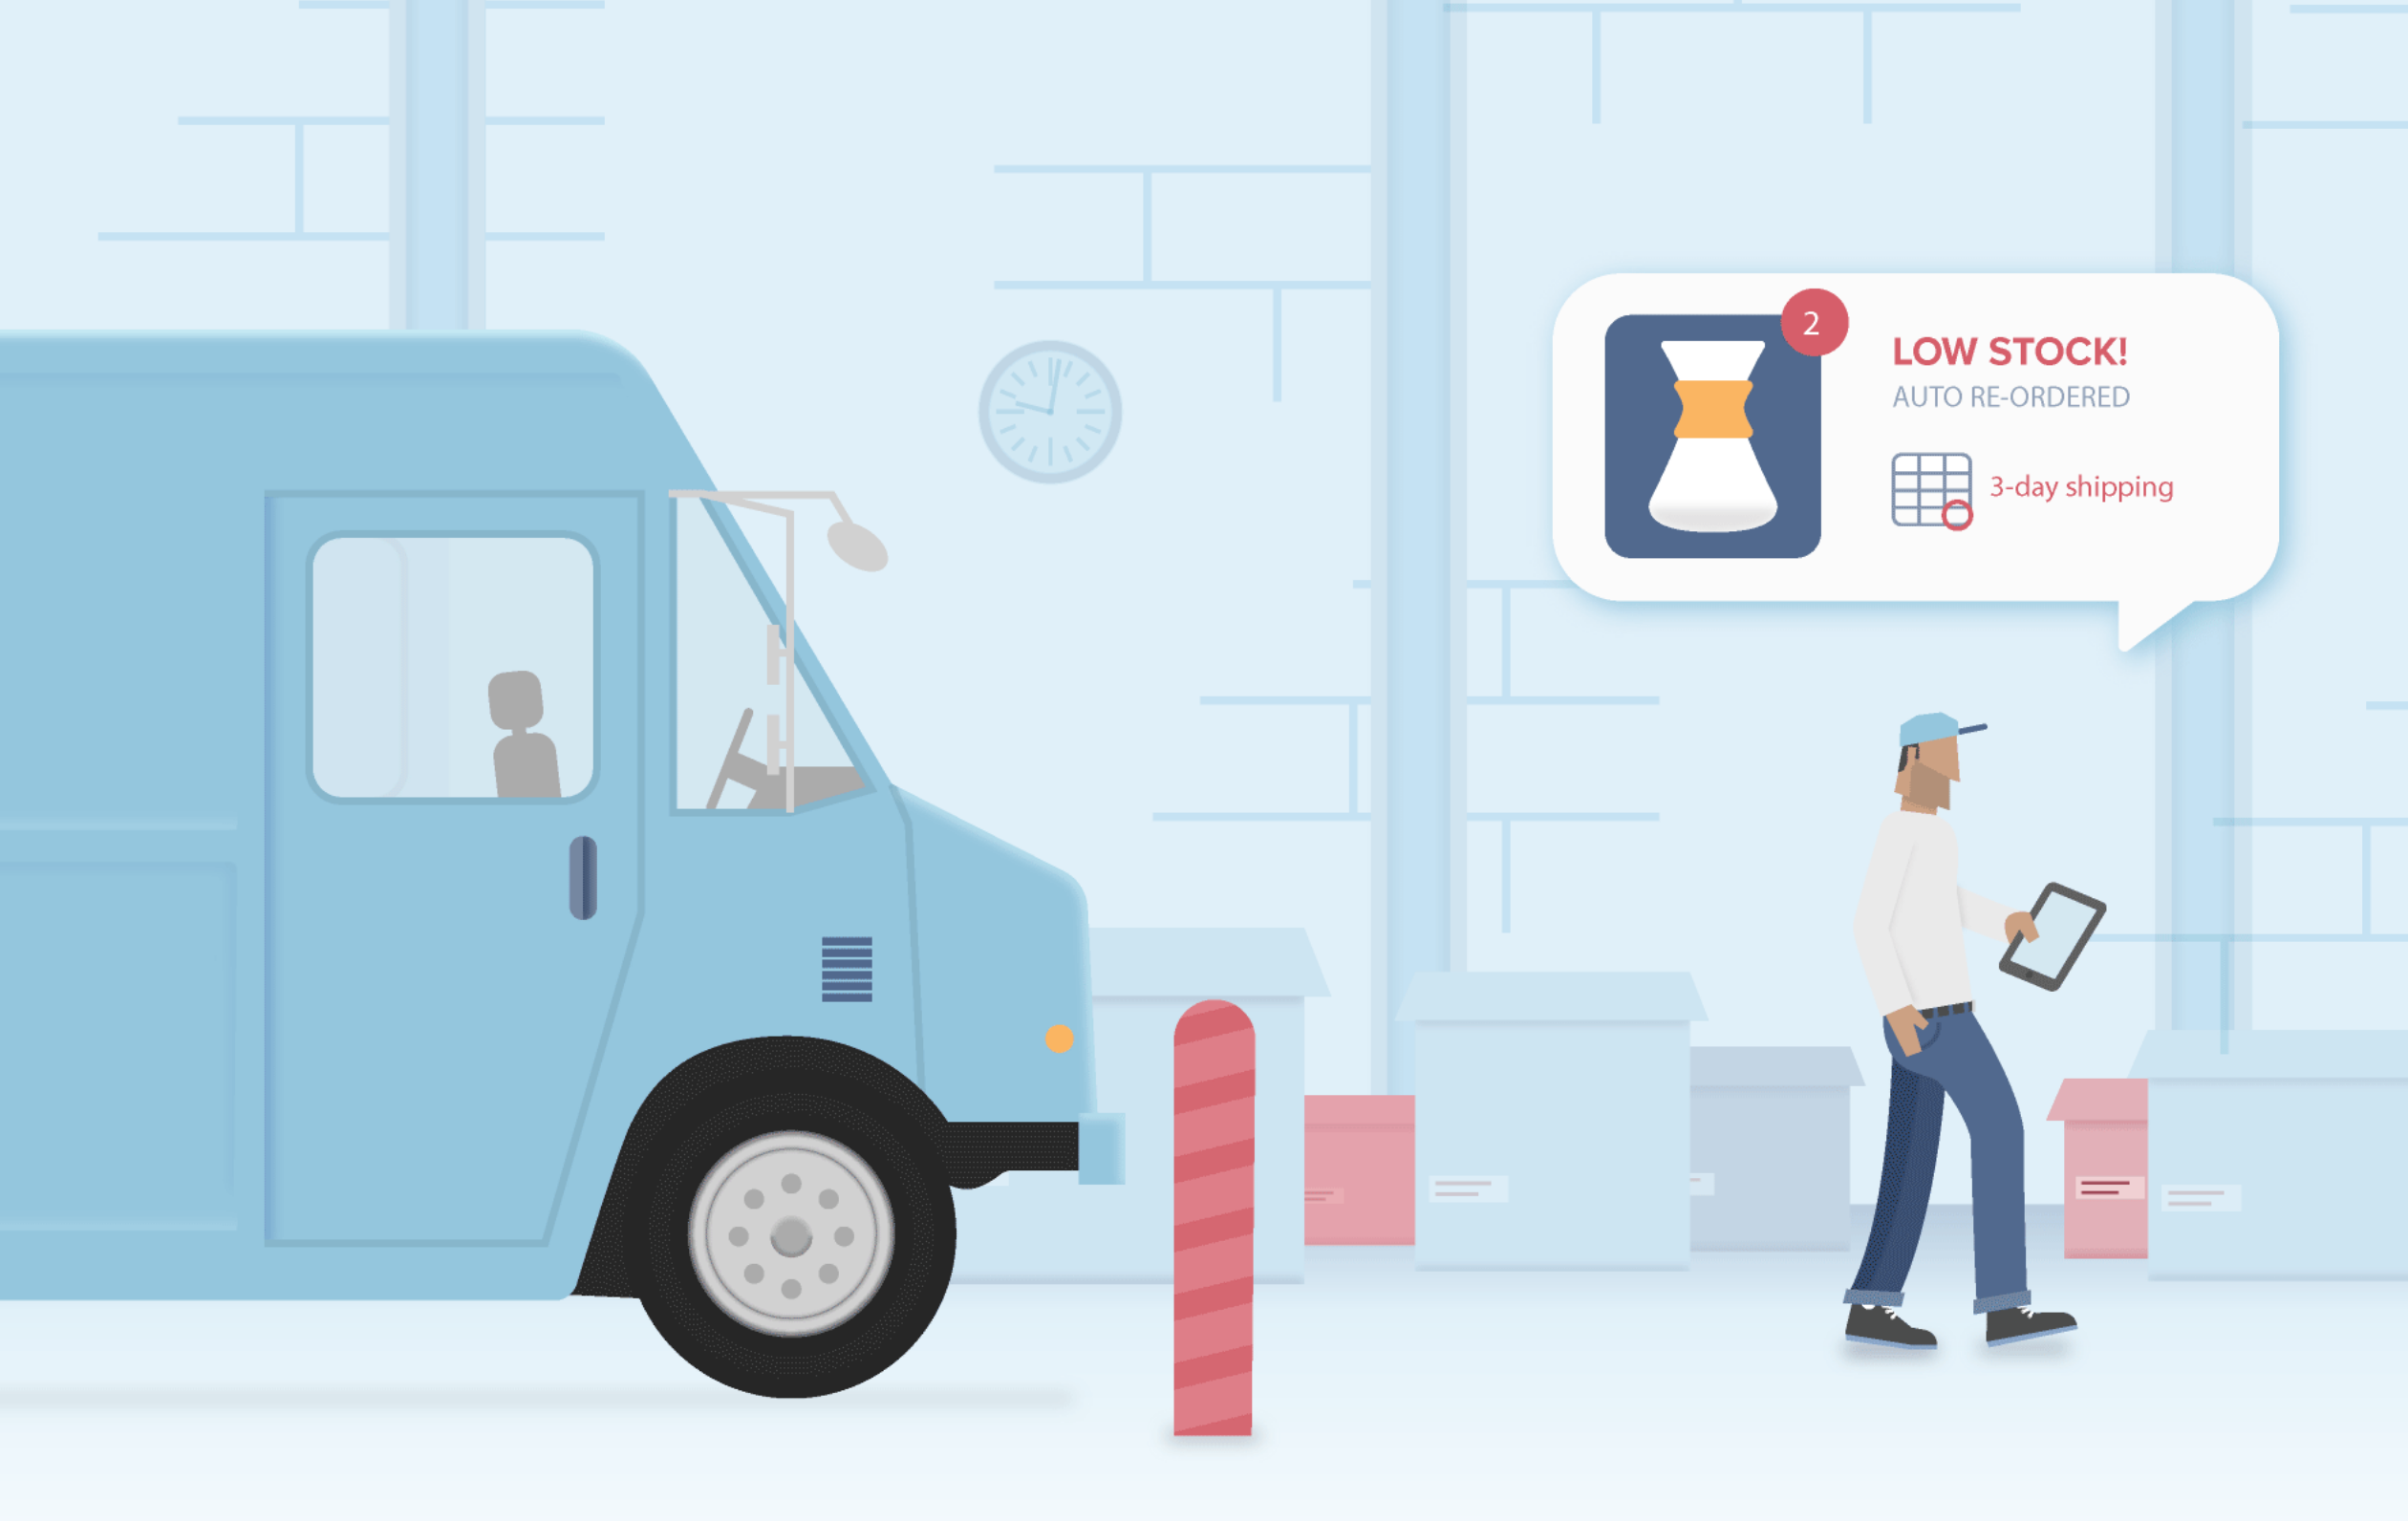 Illustration of the truck and a person in a warehouse